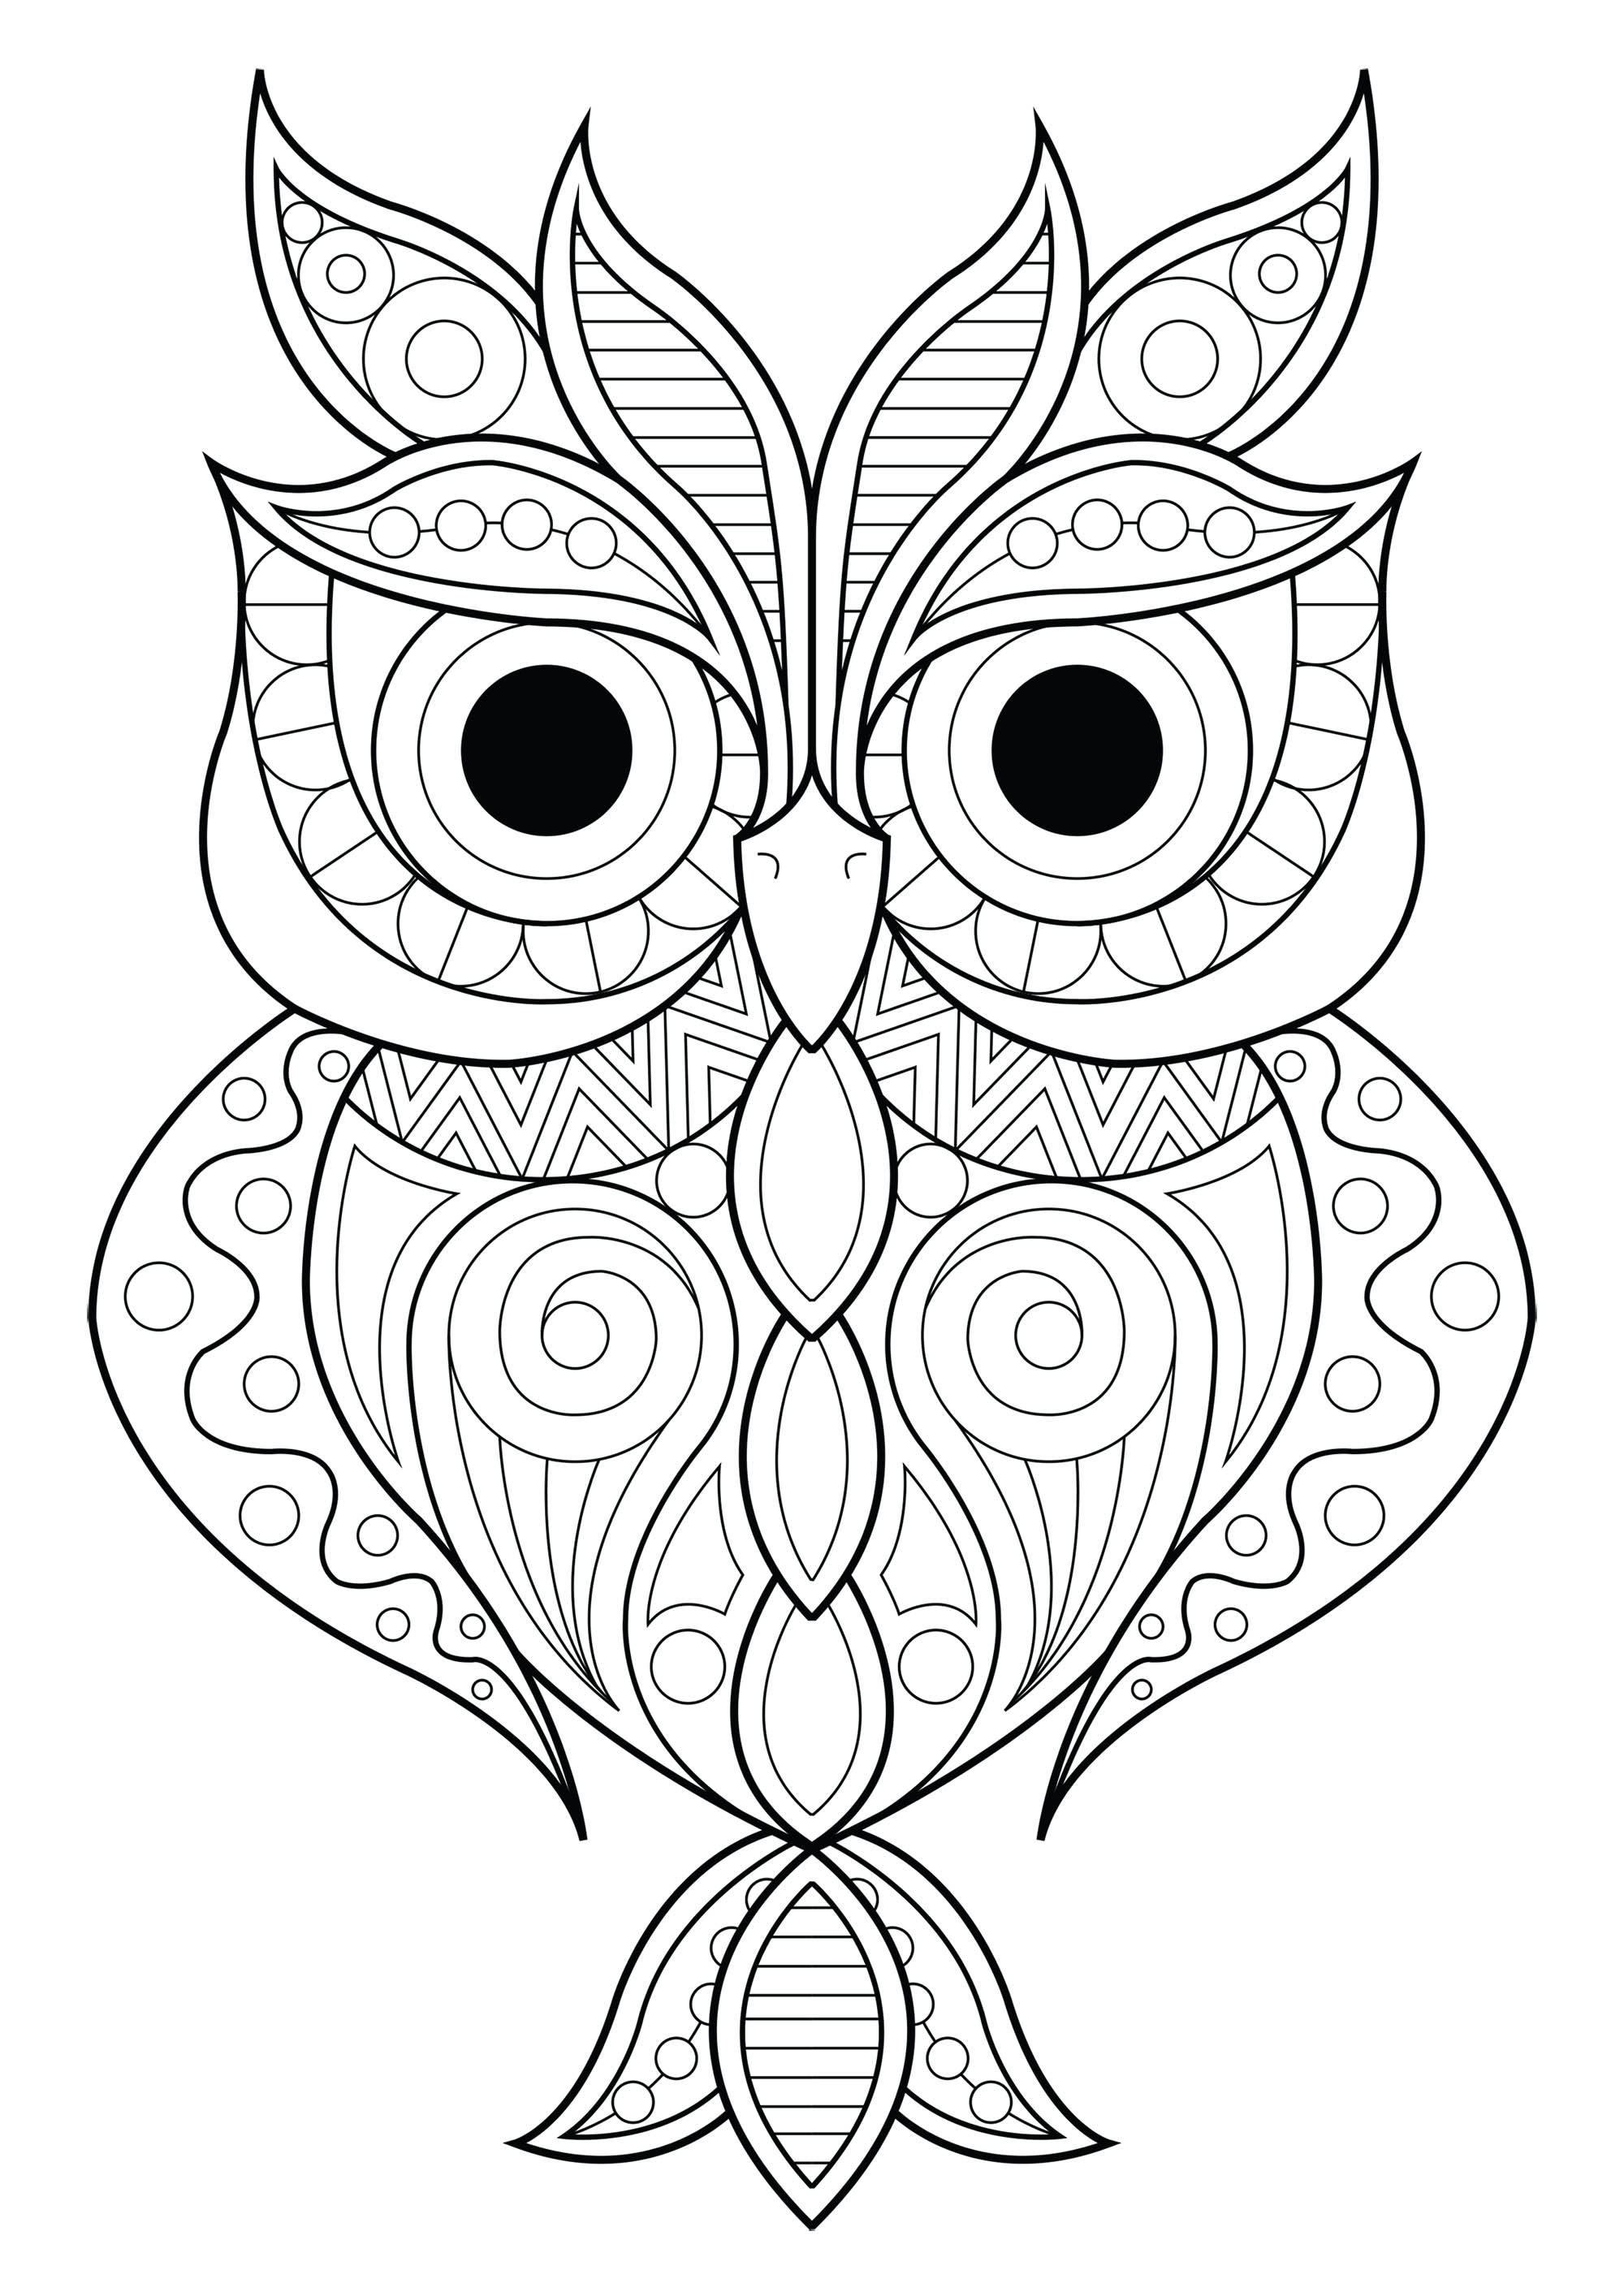 Download Owl simple patterns 2 - Owls Adult Coloring Pages